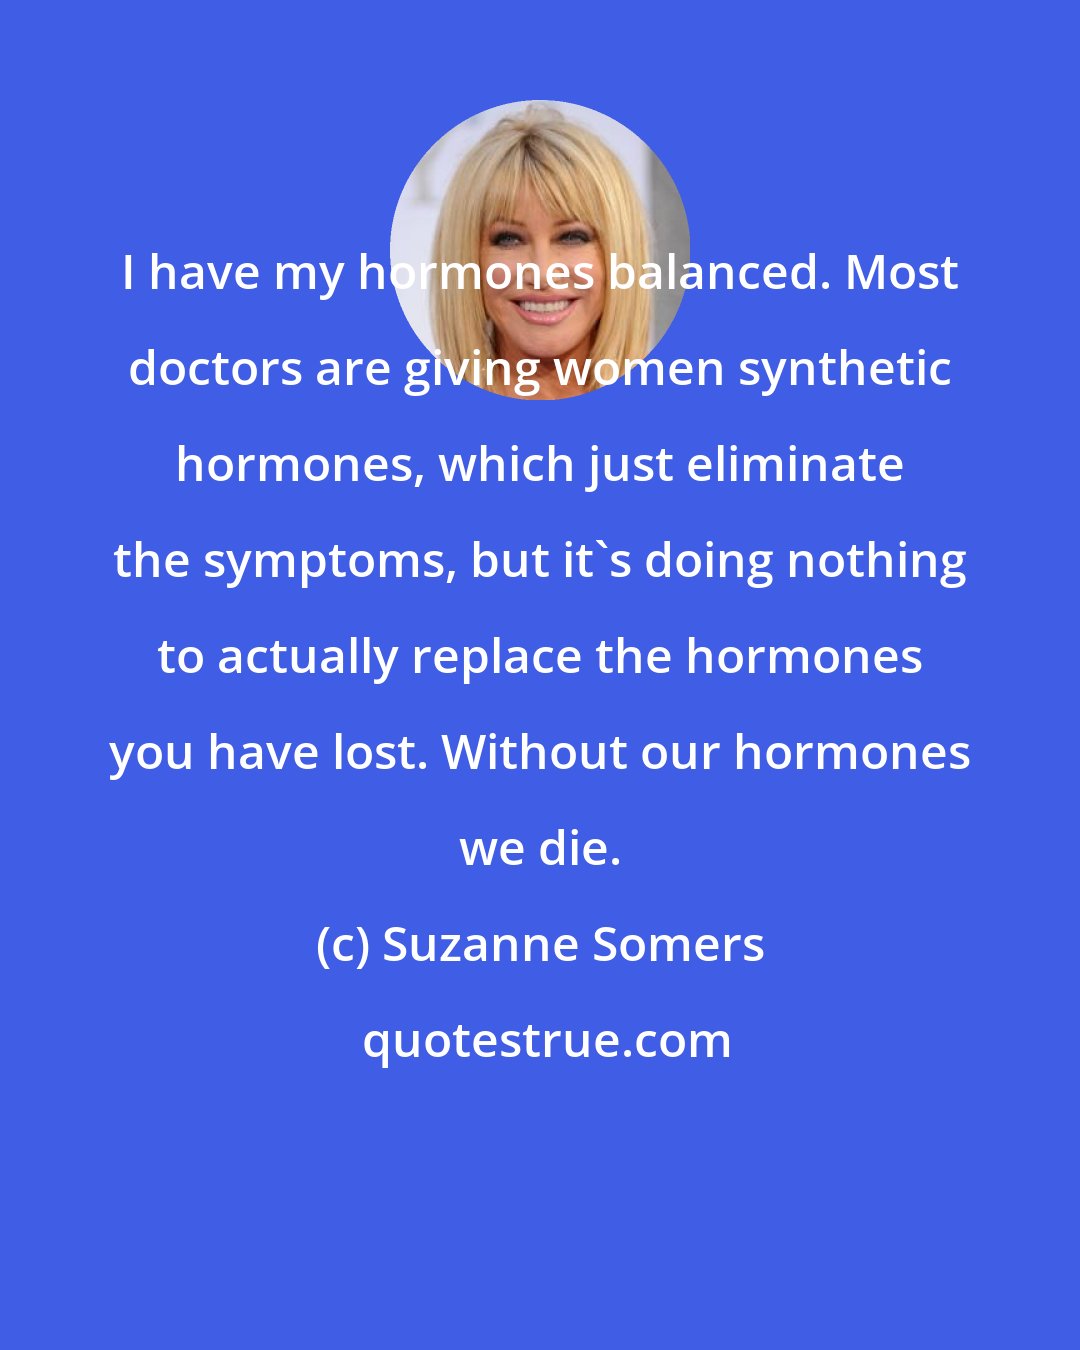 Suzanne Somers: I have my hormones balanced. Most doctors are giving women synthetic hormones, which just eliminate the symptoms, but it's doing nothing to actually replace the hormones you have lost. Without our hormones we die.